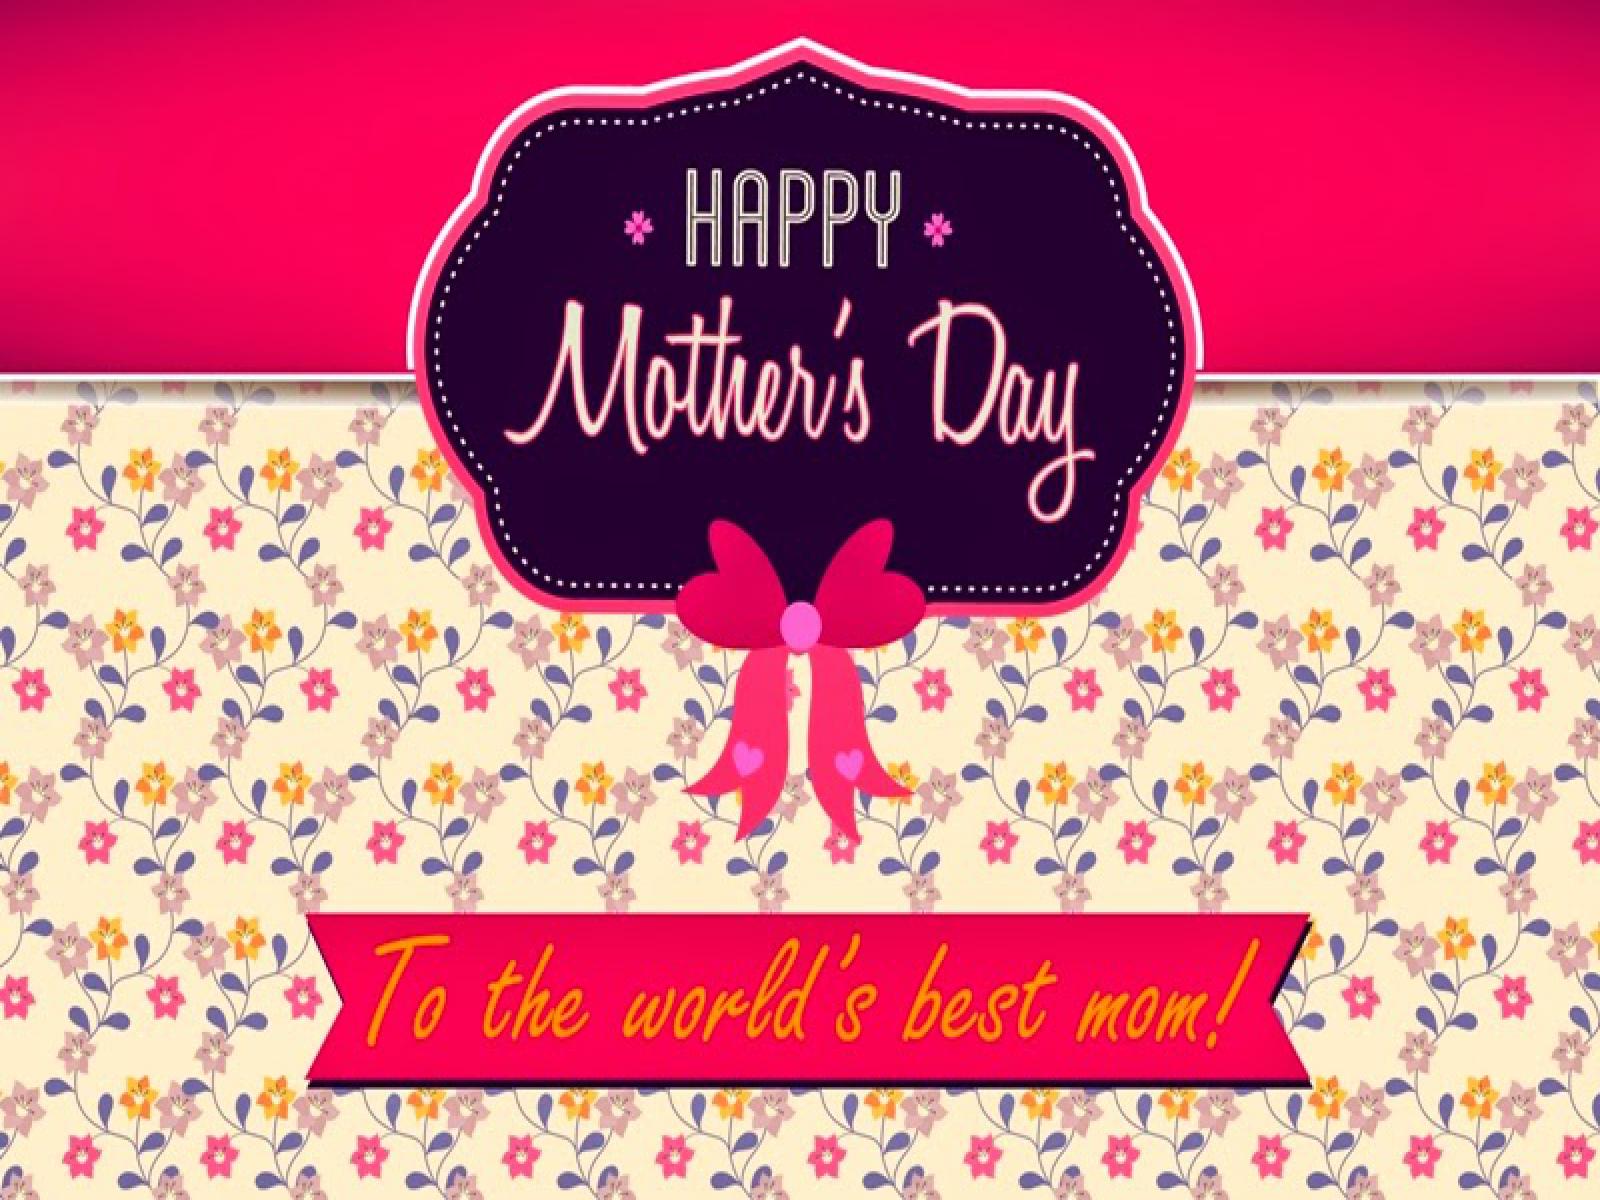 Happy Mothers Day Image, Picture, Pics, Photo, Wallpaper 2021 Download